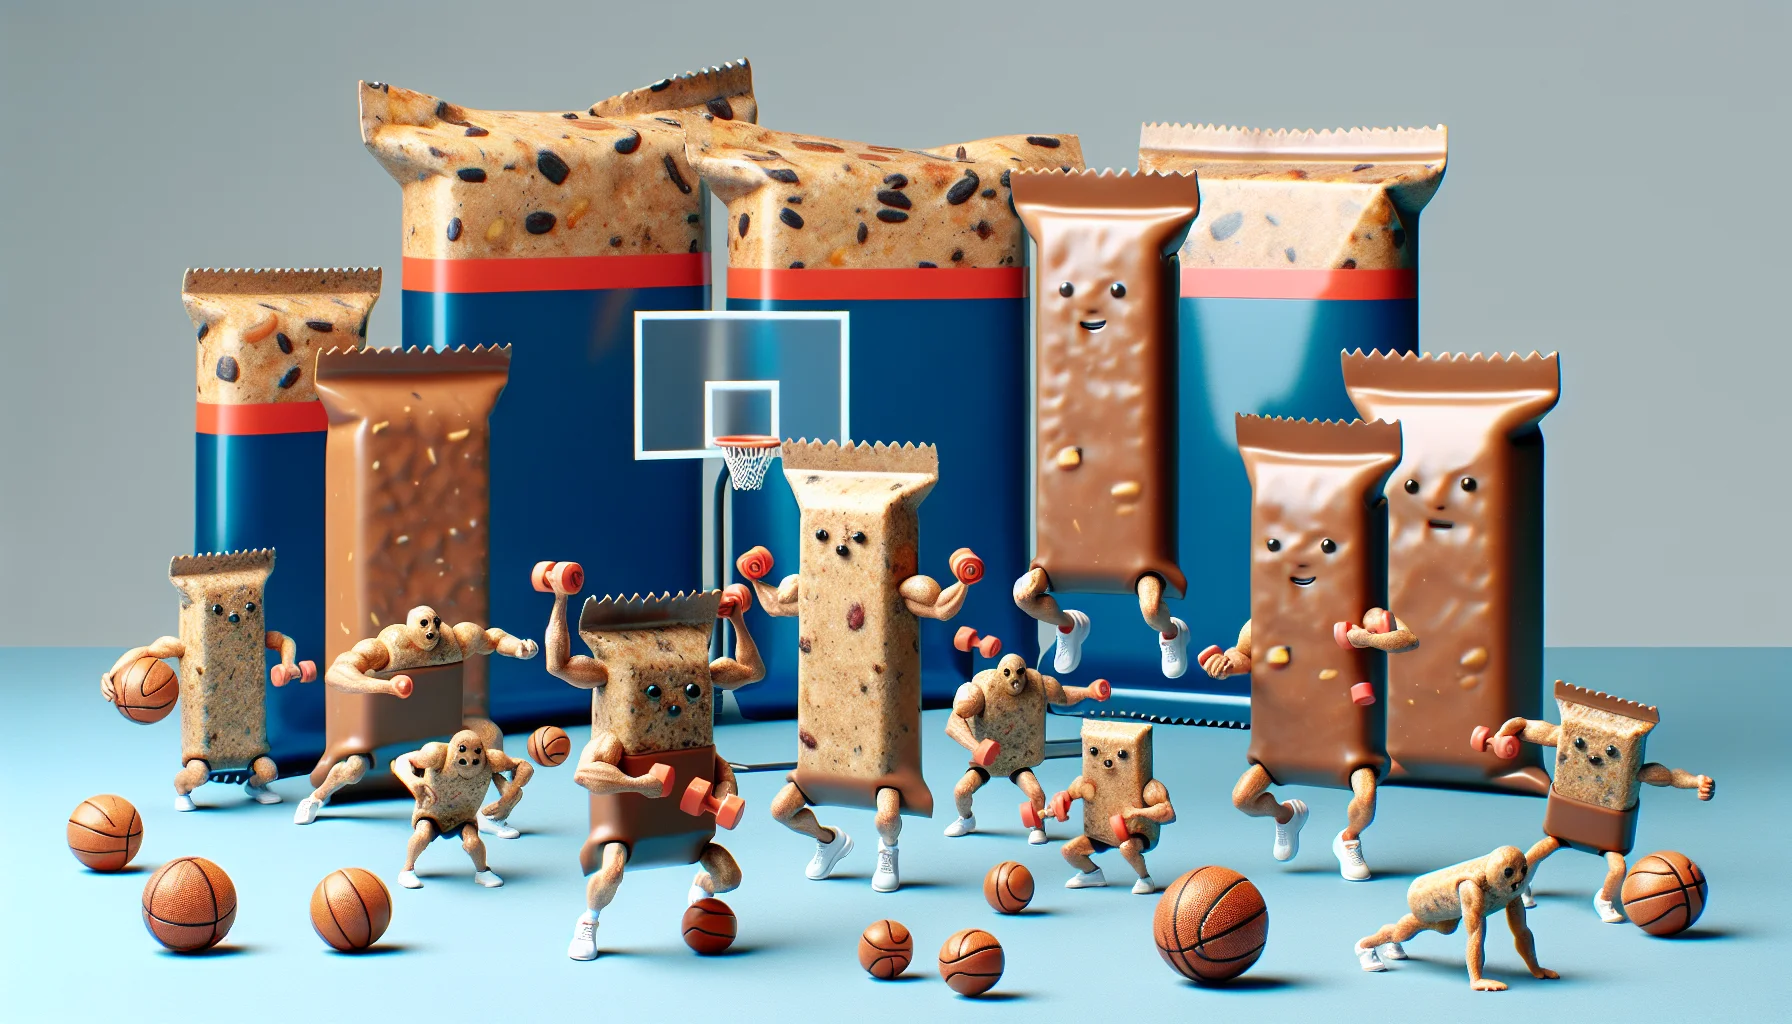 Generate a humorously engaging image that presents a collection of protein bars with a realistic texture. The protein bars appear to be participating in a variety of sports activities. A couple of protein bars are forming a basketball team, some are engaged in a running race, others are practicing yoga poses, while a few are trying to lift mini dumbbells. The protein bars should appear lively and animated, keen on demonstrating their connection with sports and fitness. Background can comprise of a faux sports field or gym environment to further enhance the sports association.